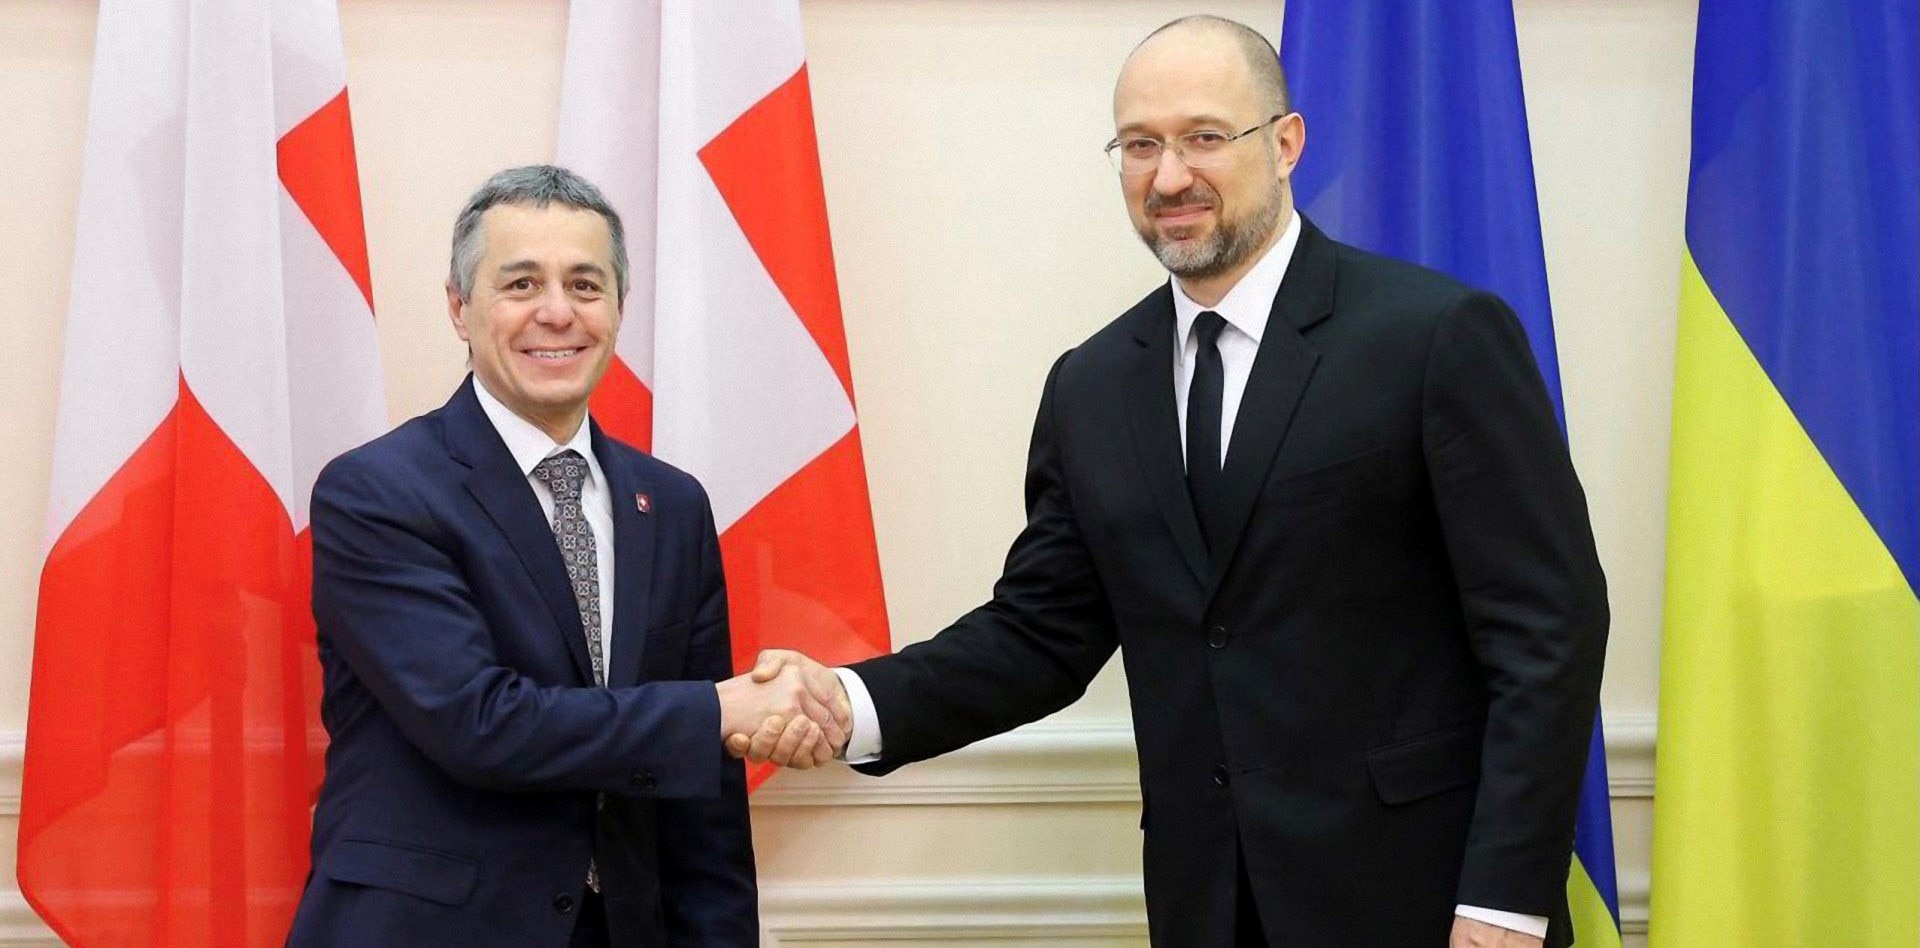 : Federal Councillor Cassis and Ukrainian Prime Minister Denys Shmyhal shake hands.